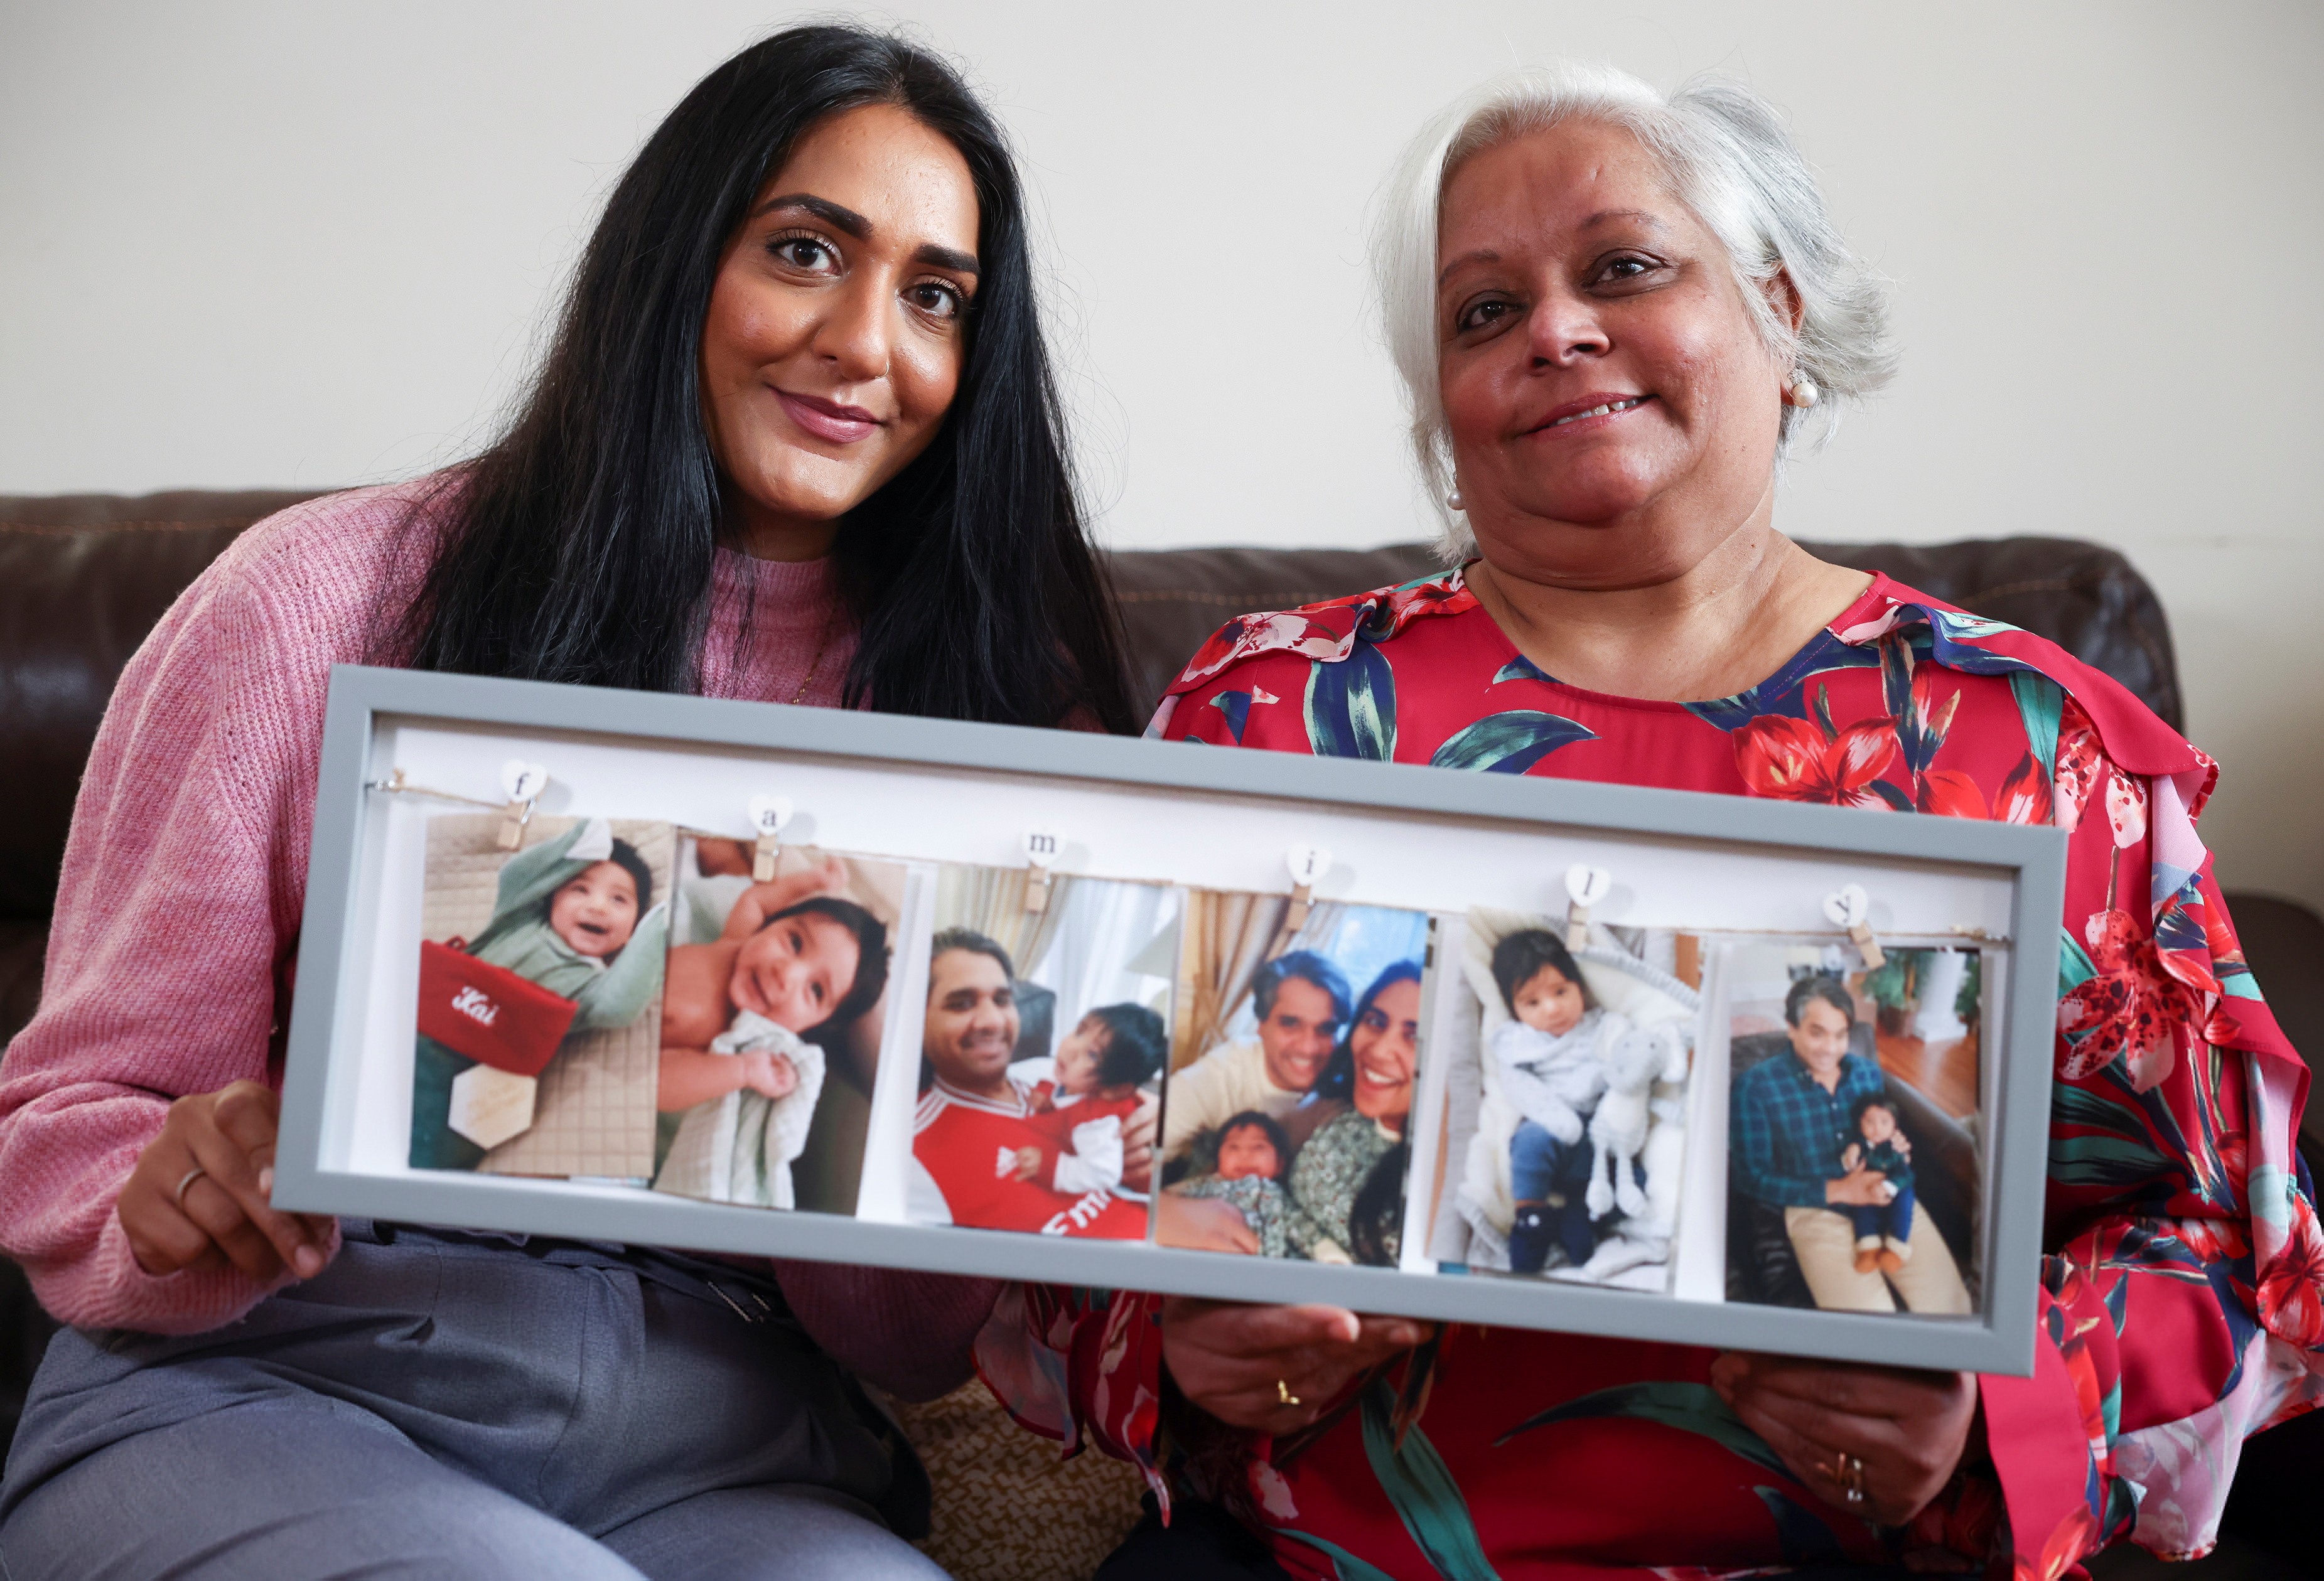 Bhavna Patel and her daughter Bindiya Patel, who are due to fly to New York to reunite with family following the relaxing of the coronavirus disease (COVID-19) travel restrictions, pose at their home in Croydon, Britain, November 5, 2021. REUTERS/Henry Nicholls